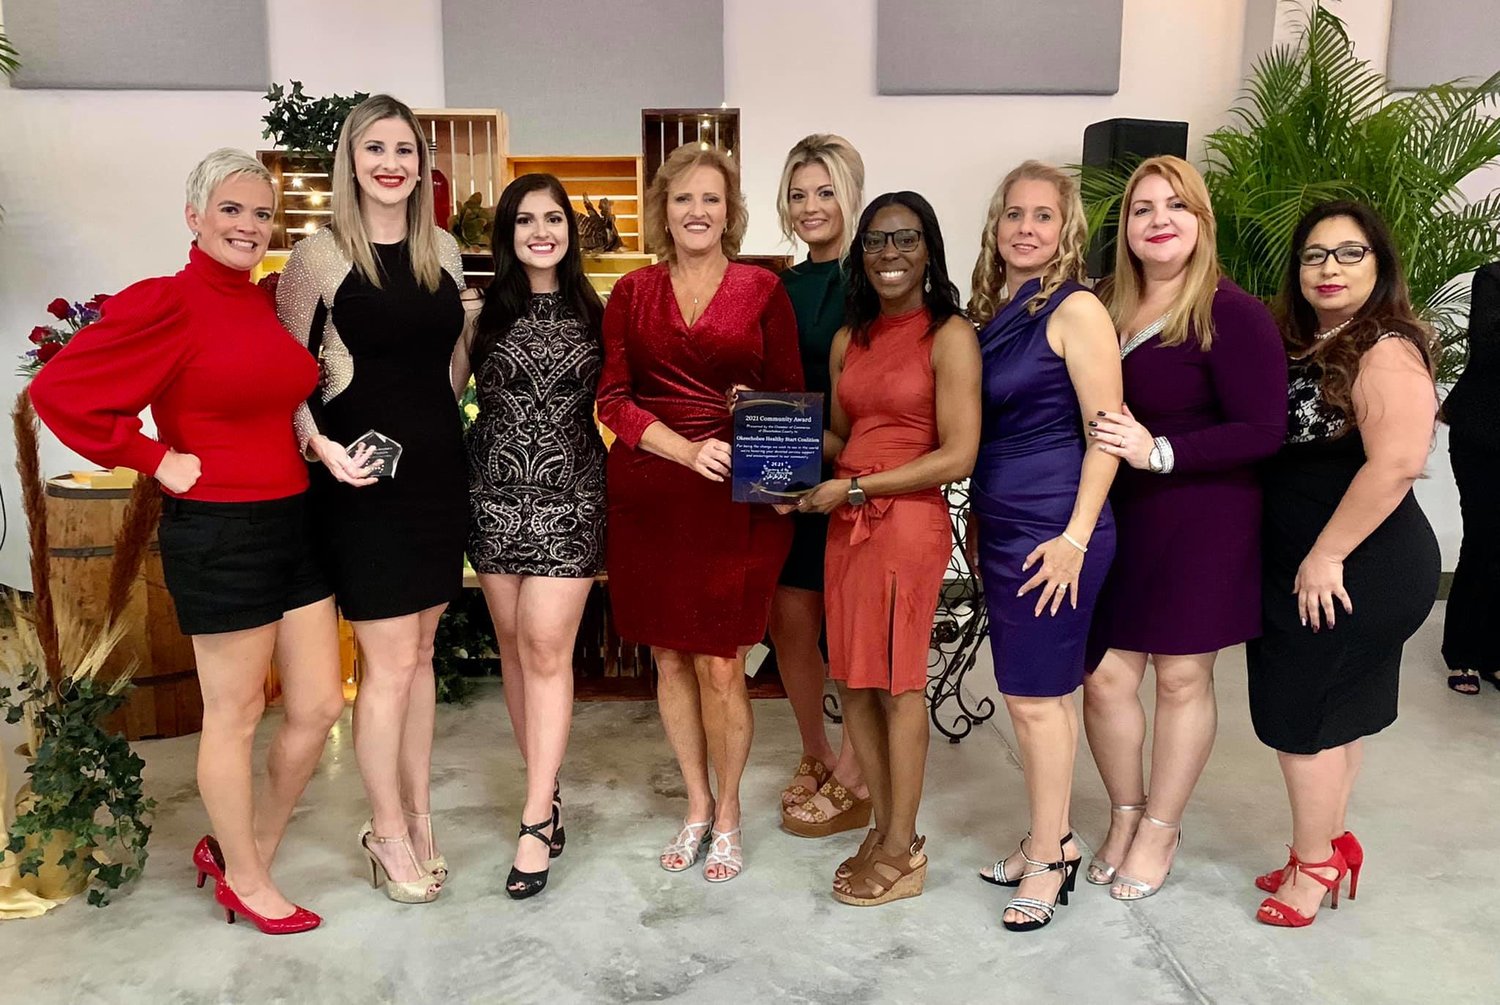 OKEECHOBEE – Healthy Start received the Community Award at the Chamber of Commerce of Okeechobee County Business of the Year Awards on Oct. 23. [Courtesy photo]